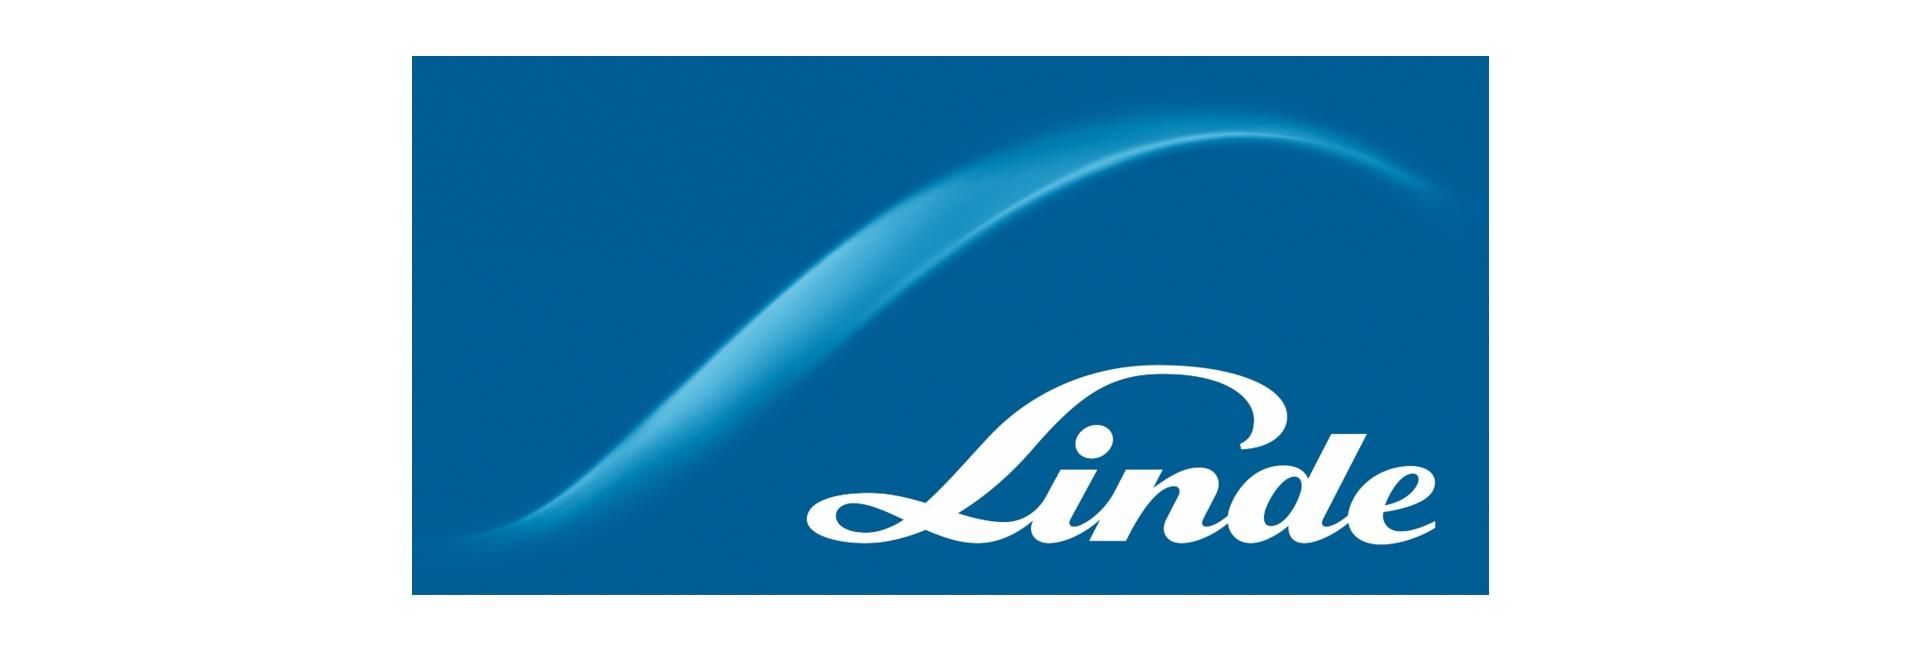 Linde is Building a New Air Separation Unit in Kazincbarcika - VIDEO REPORT